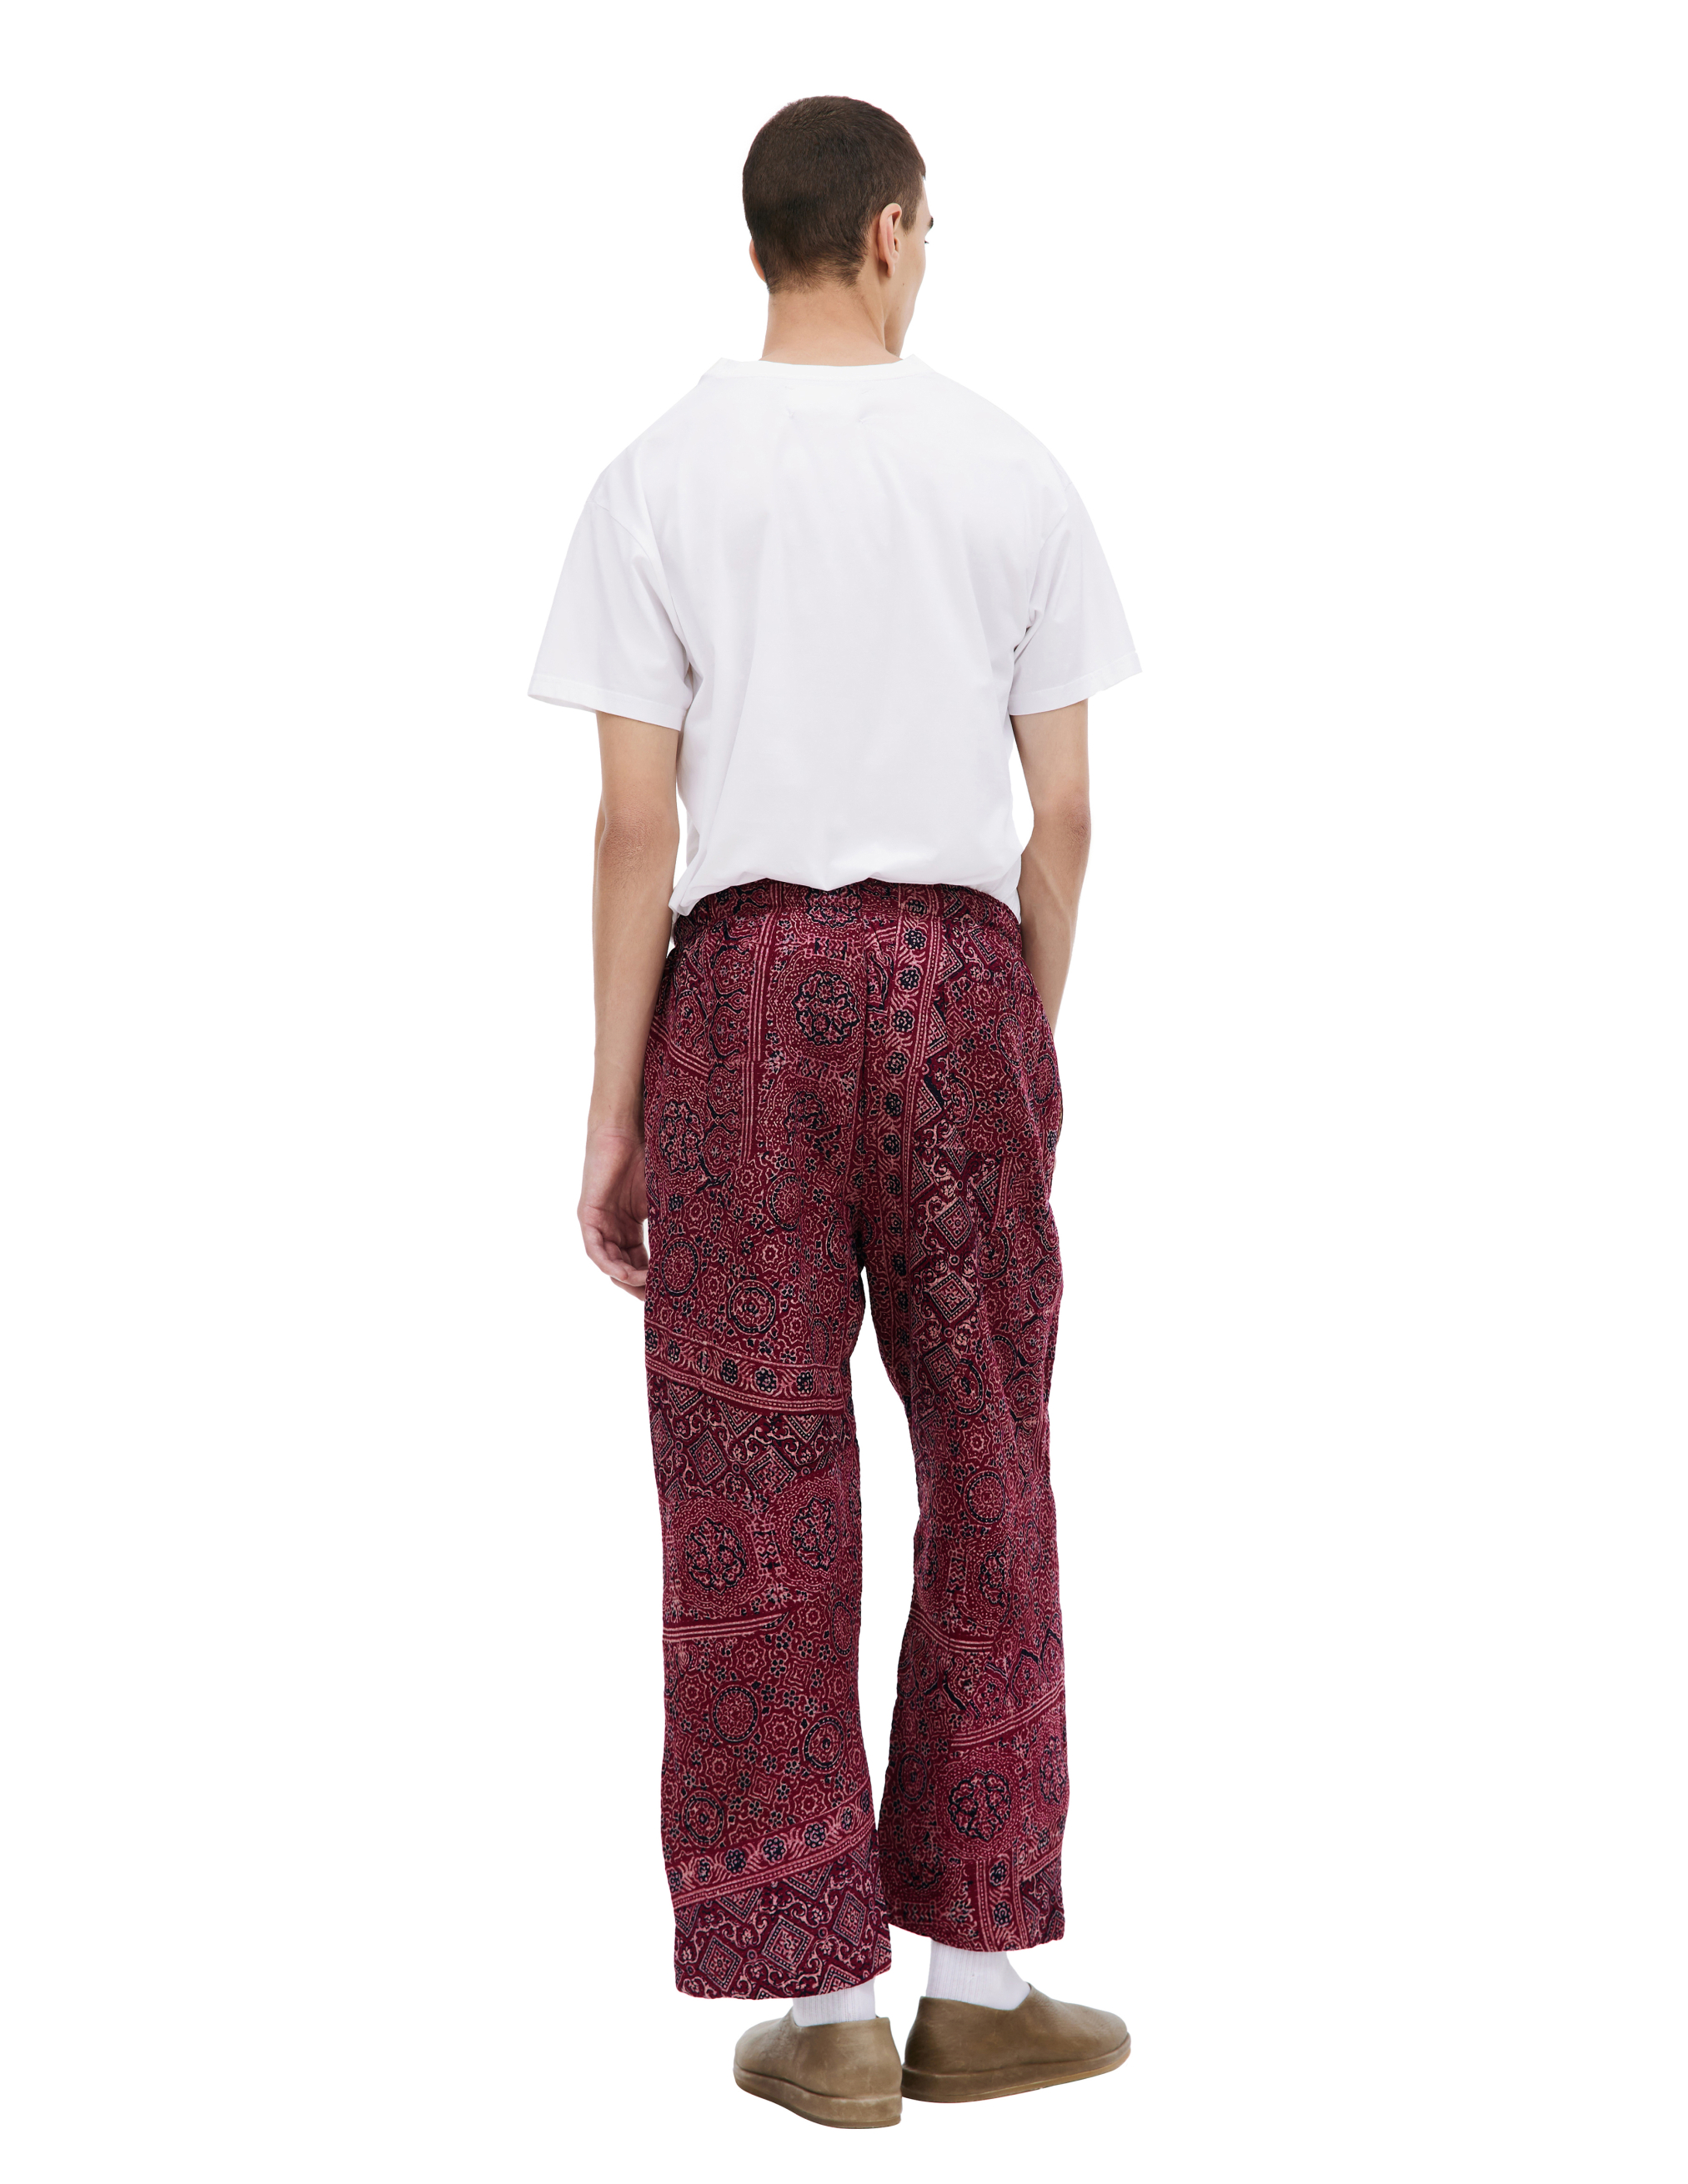 Shop Karu Research Red Paneled Trousers